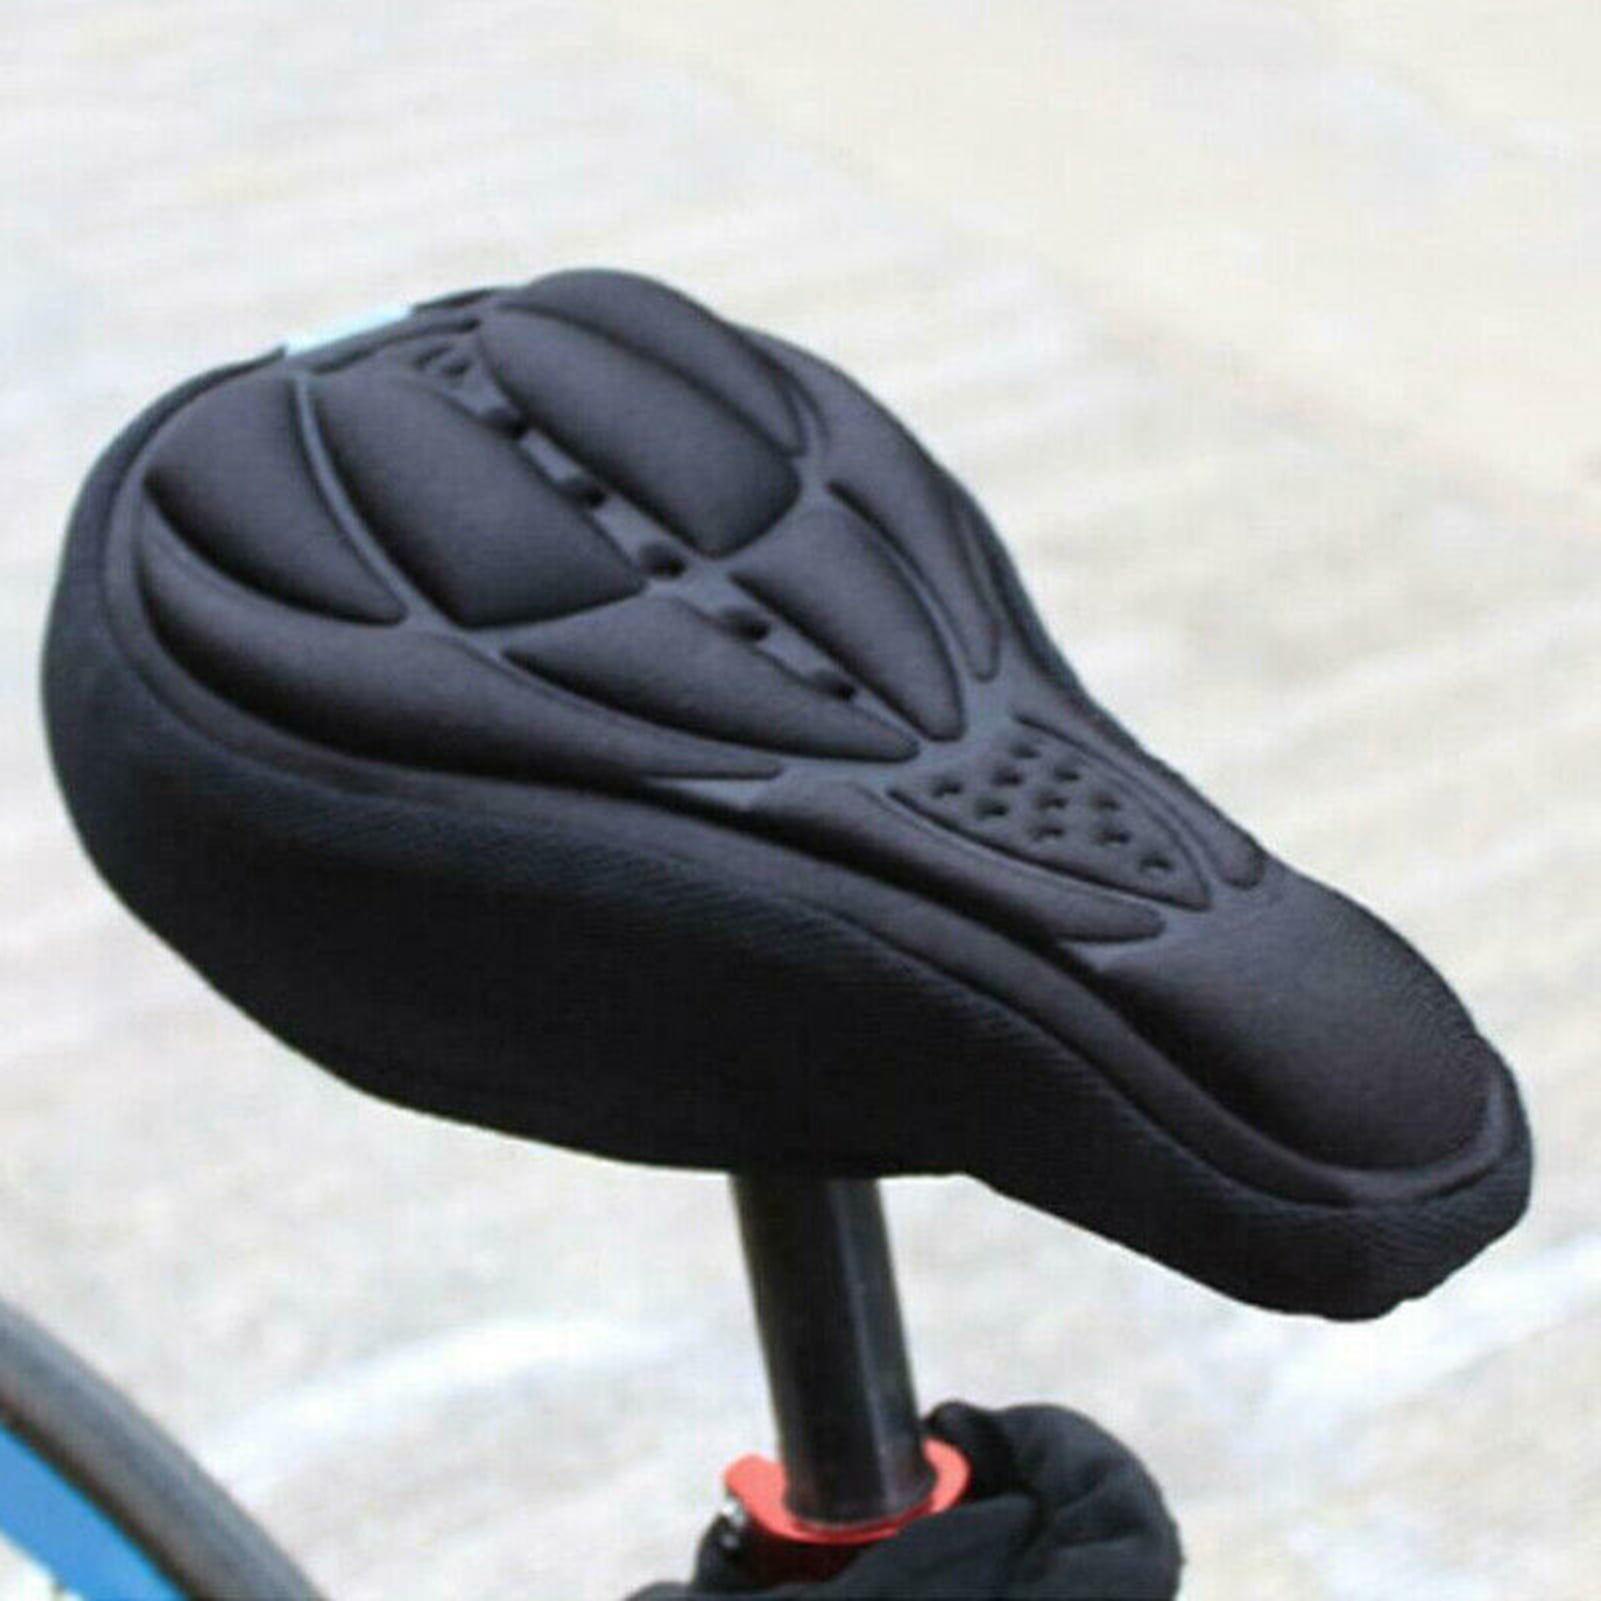 Details about   Bike Bicycle Silicone 3D Gel Saddle Seat Cover Pad Padded Soft Cushion Comfor UK 